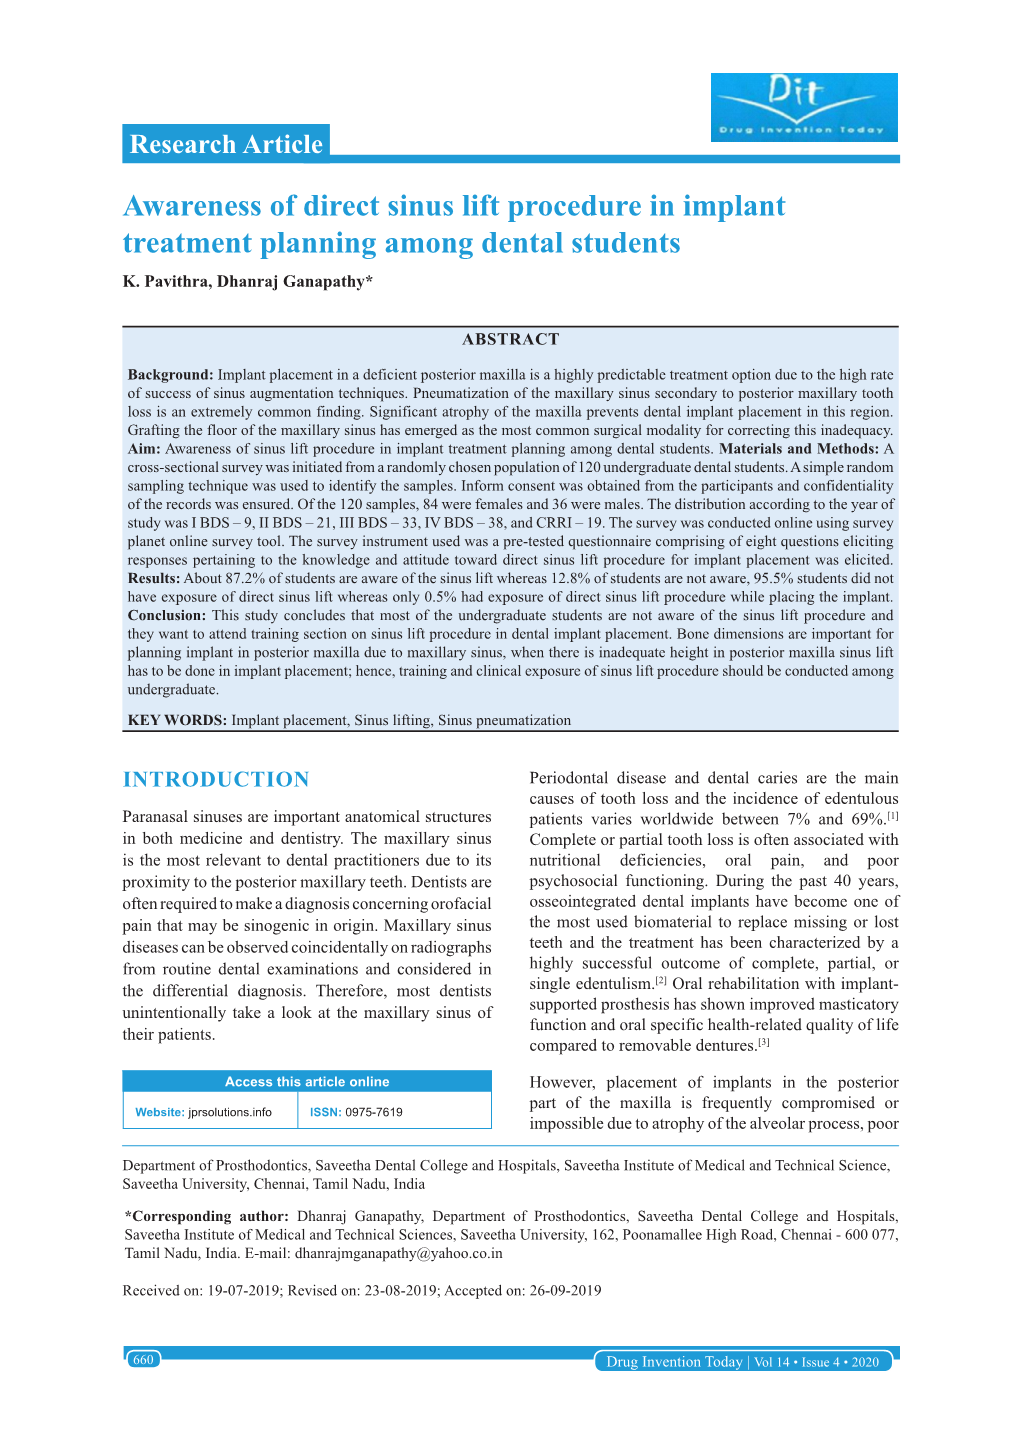 Awareness of Direct Sinus Lift Procedure in Implant Treatment Planning Among Dental Students K